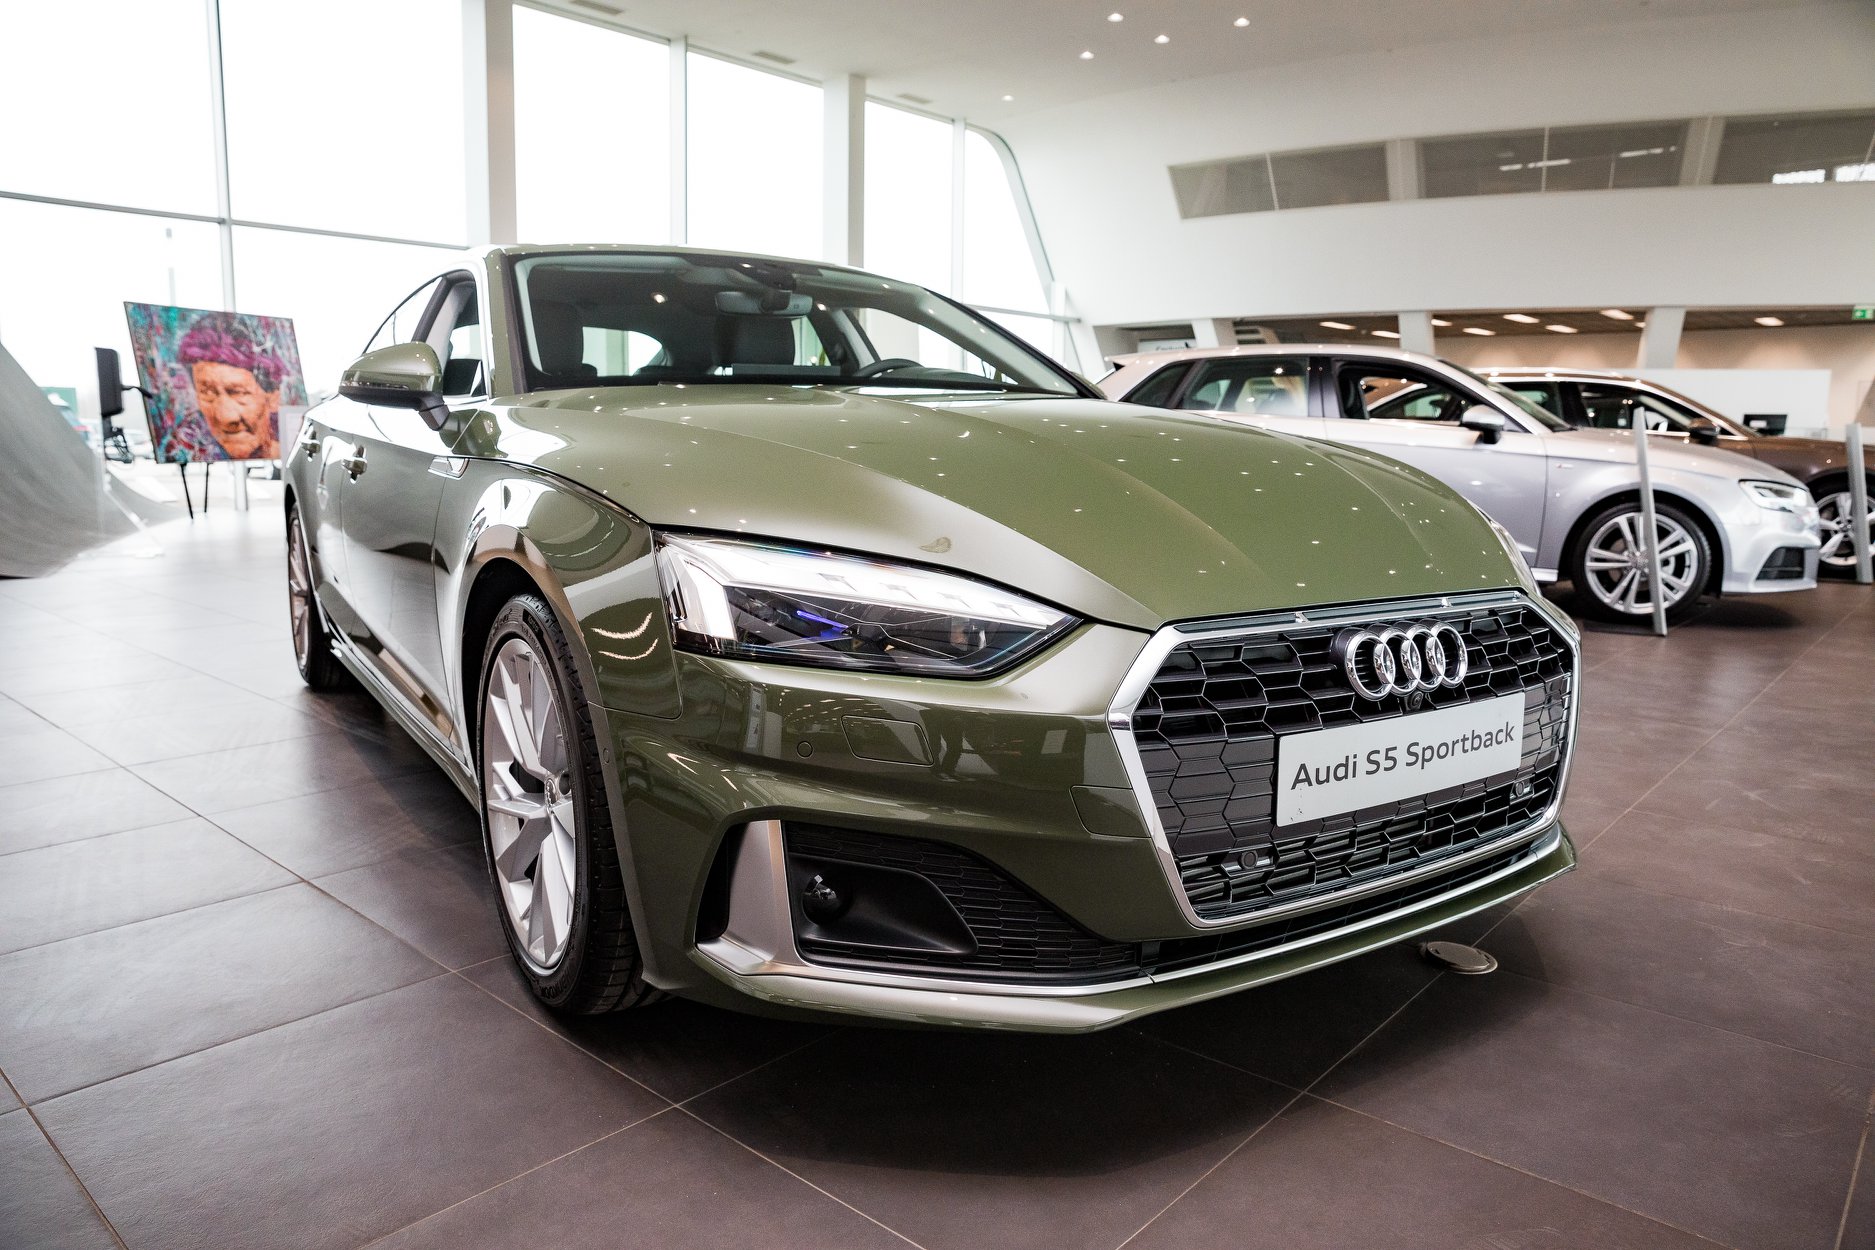 How Do You Feel About This Audi A5 Sportback In District Green? Carscoops